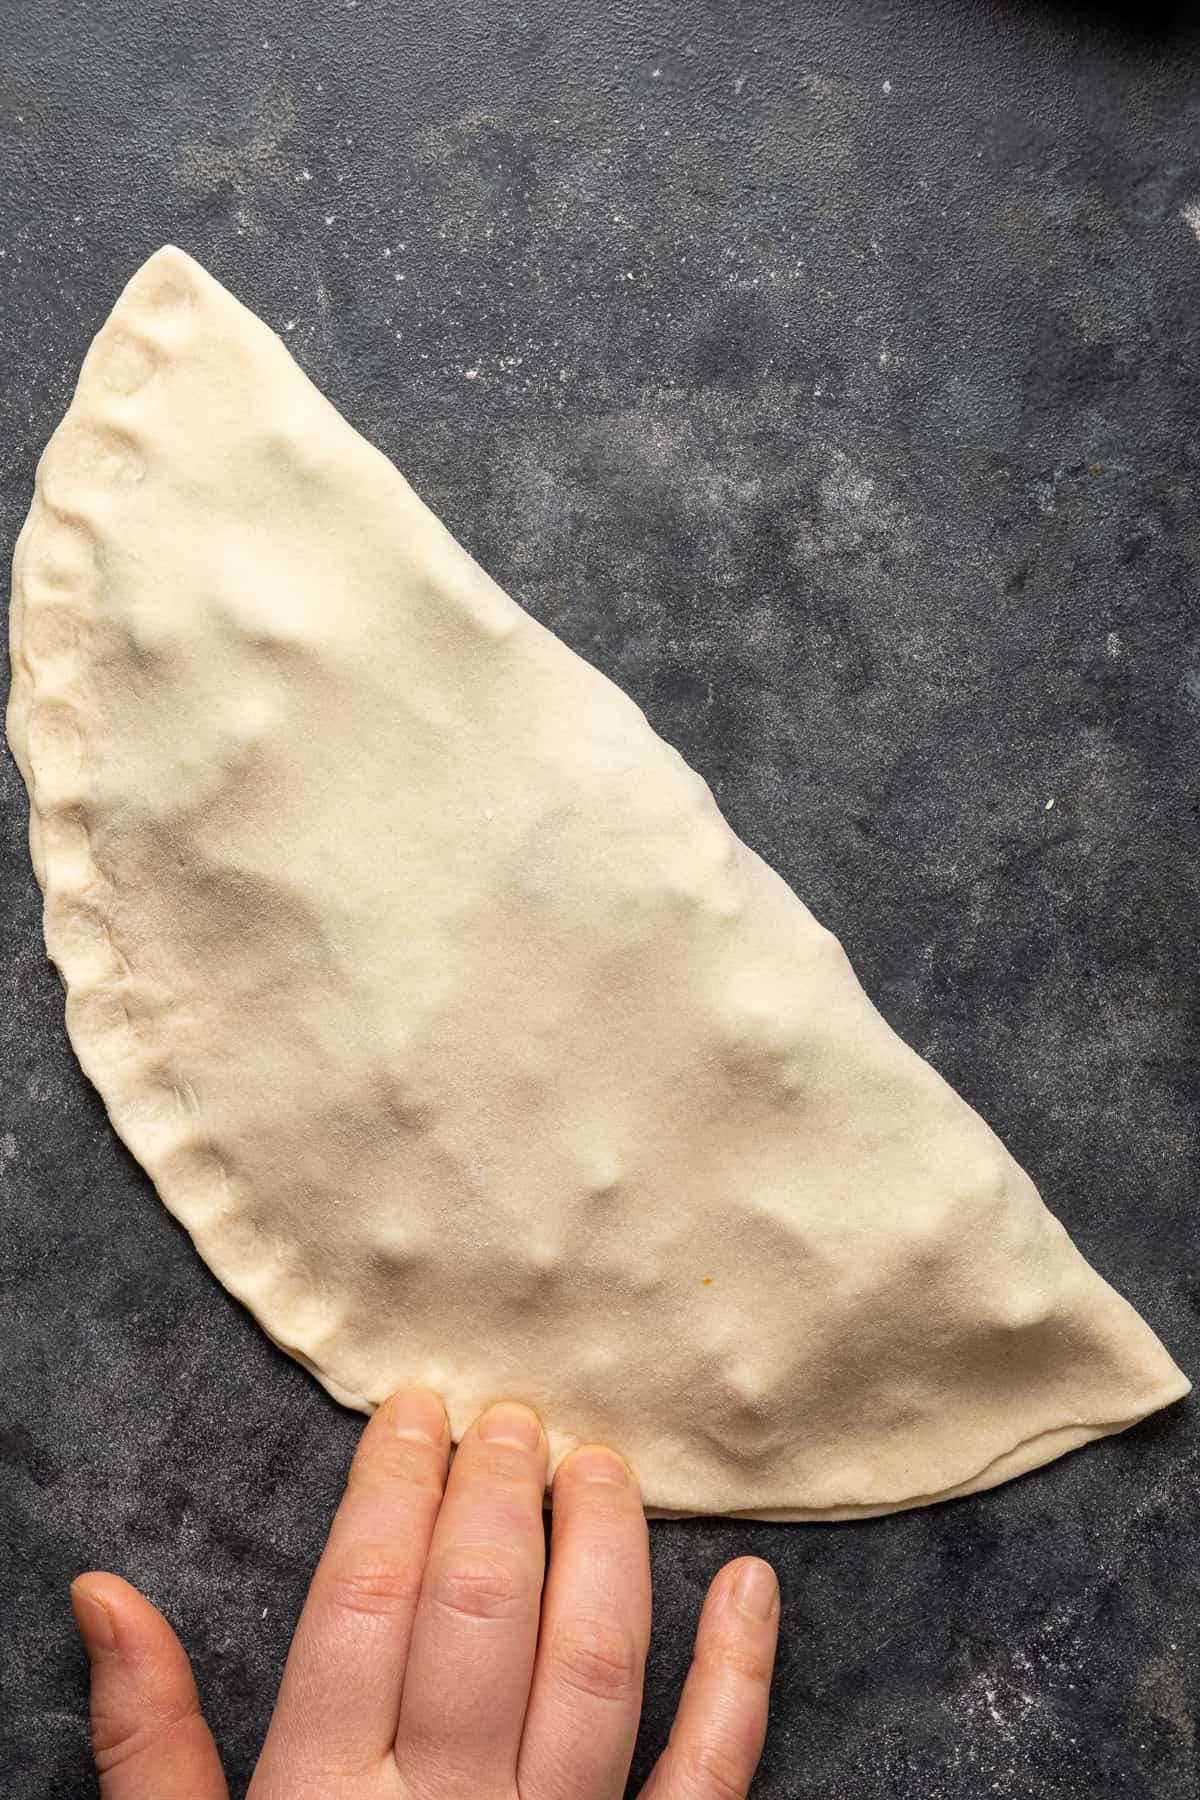 Sealing the edges of the filled dough to shape the gözleme